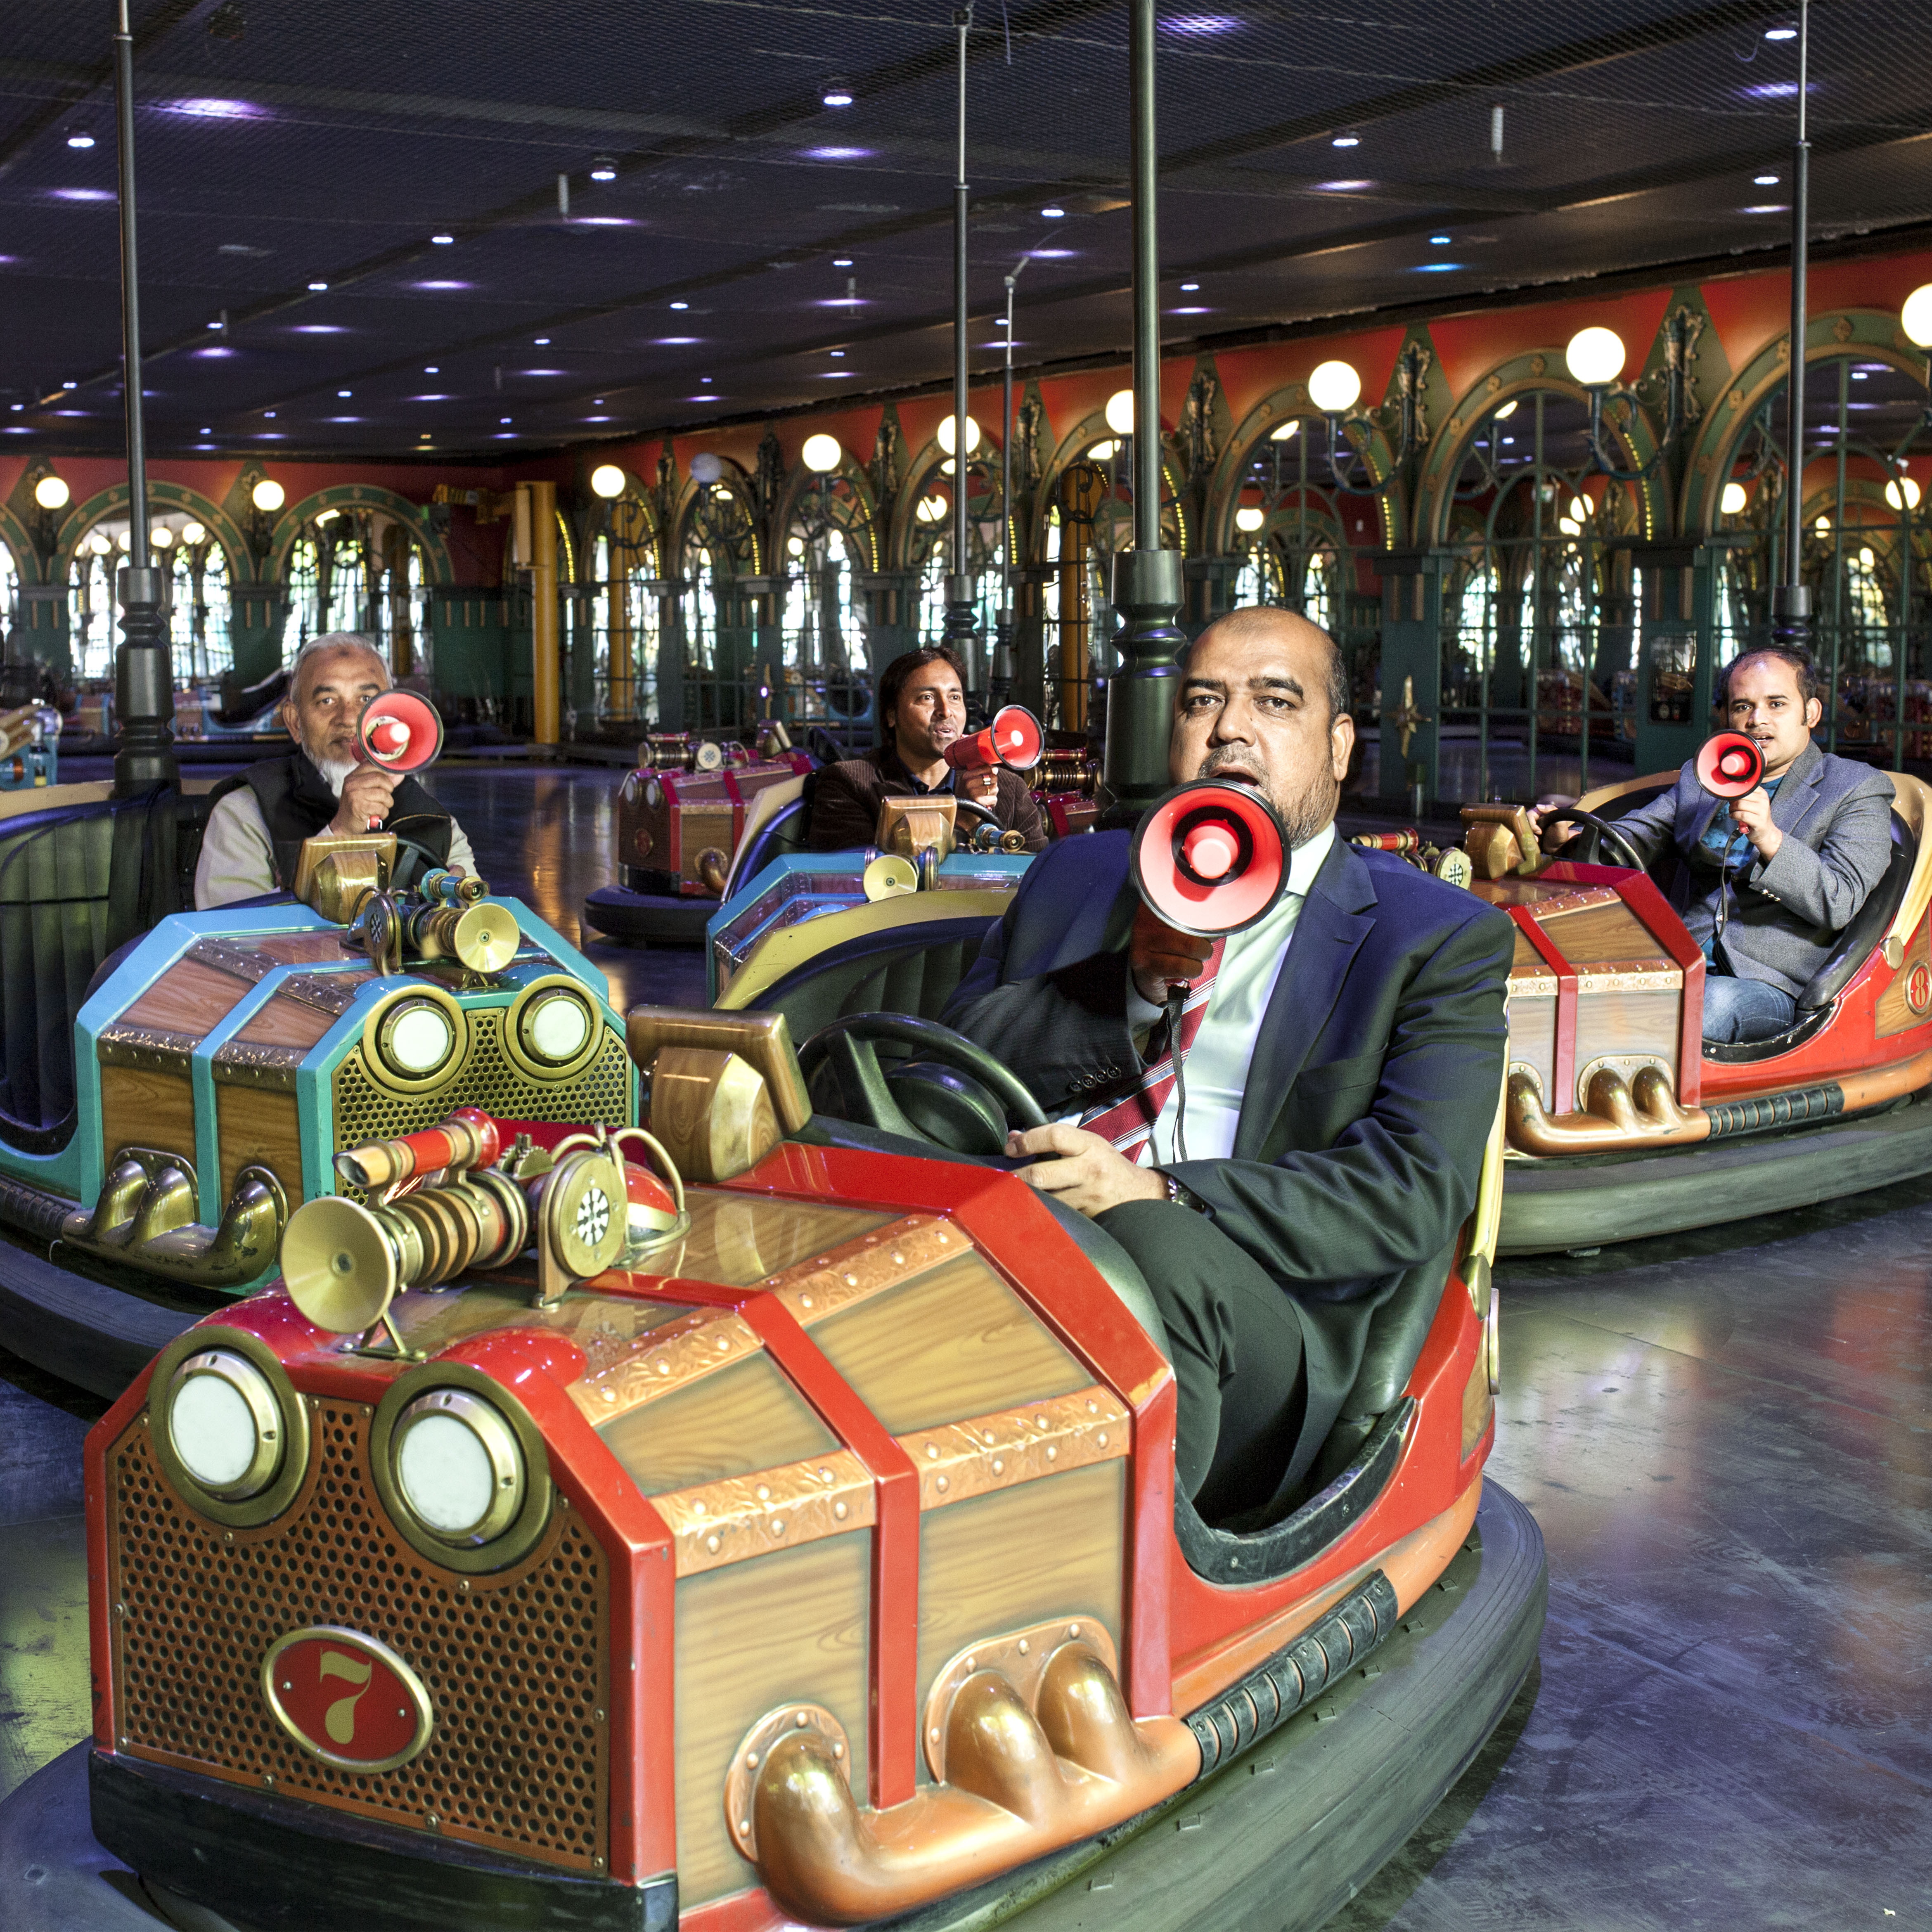 Immigrant men shouting into megaphones and sitting in bumper cars